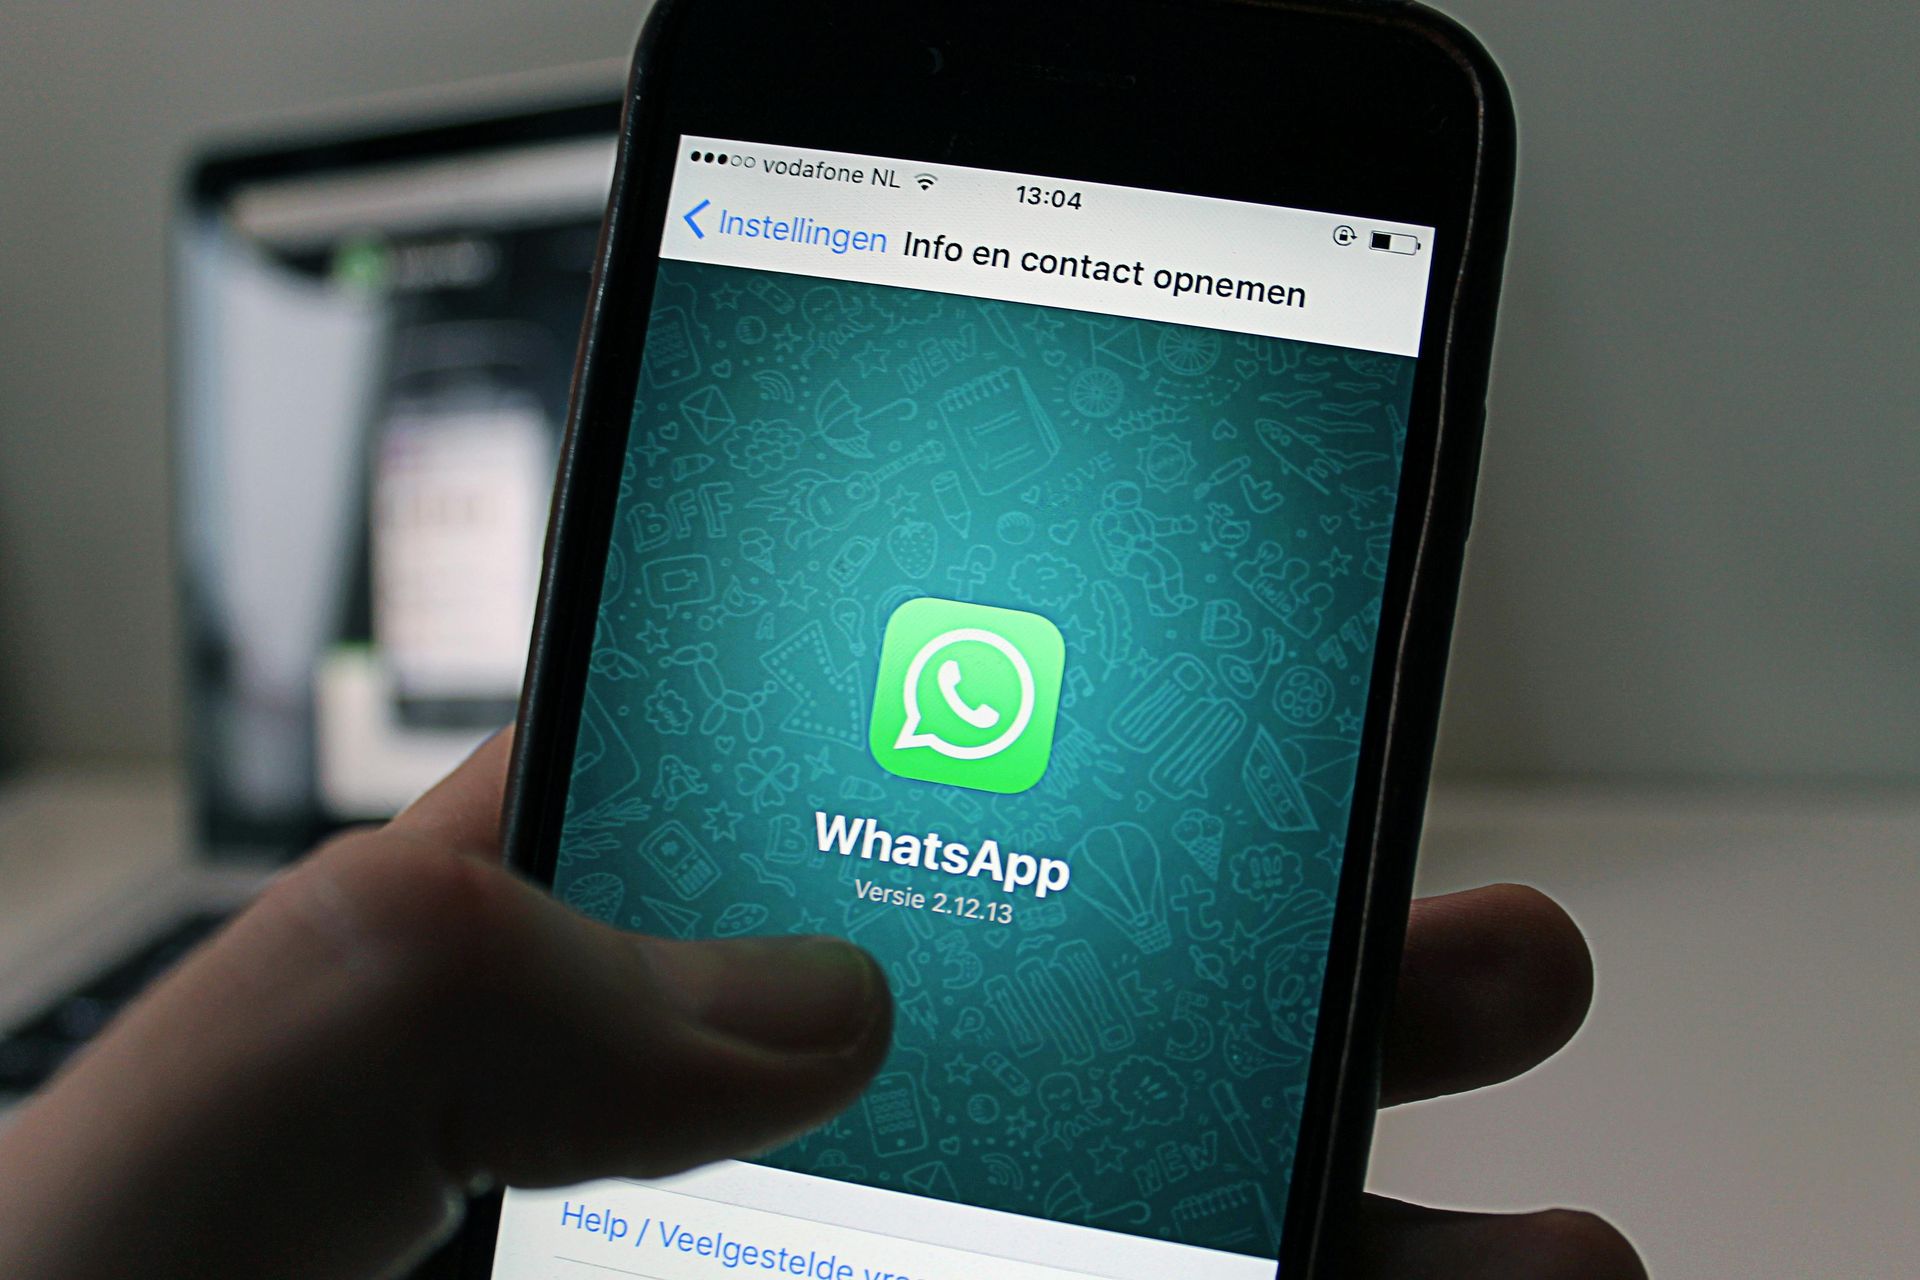 How does the WhatsApp Chat Filters feature work?